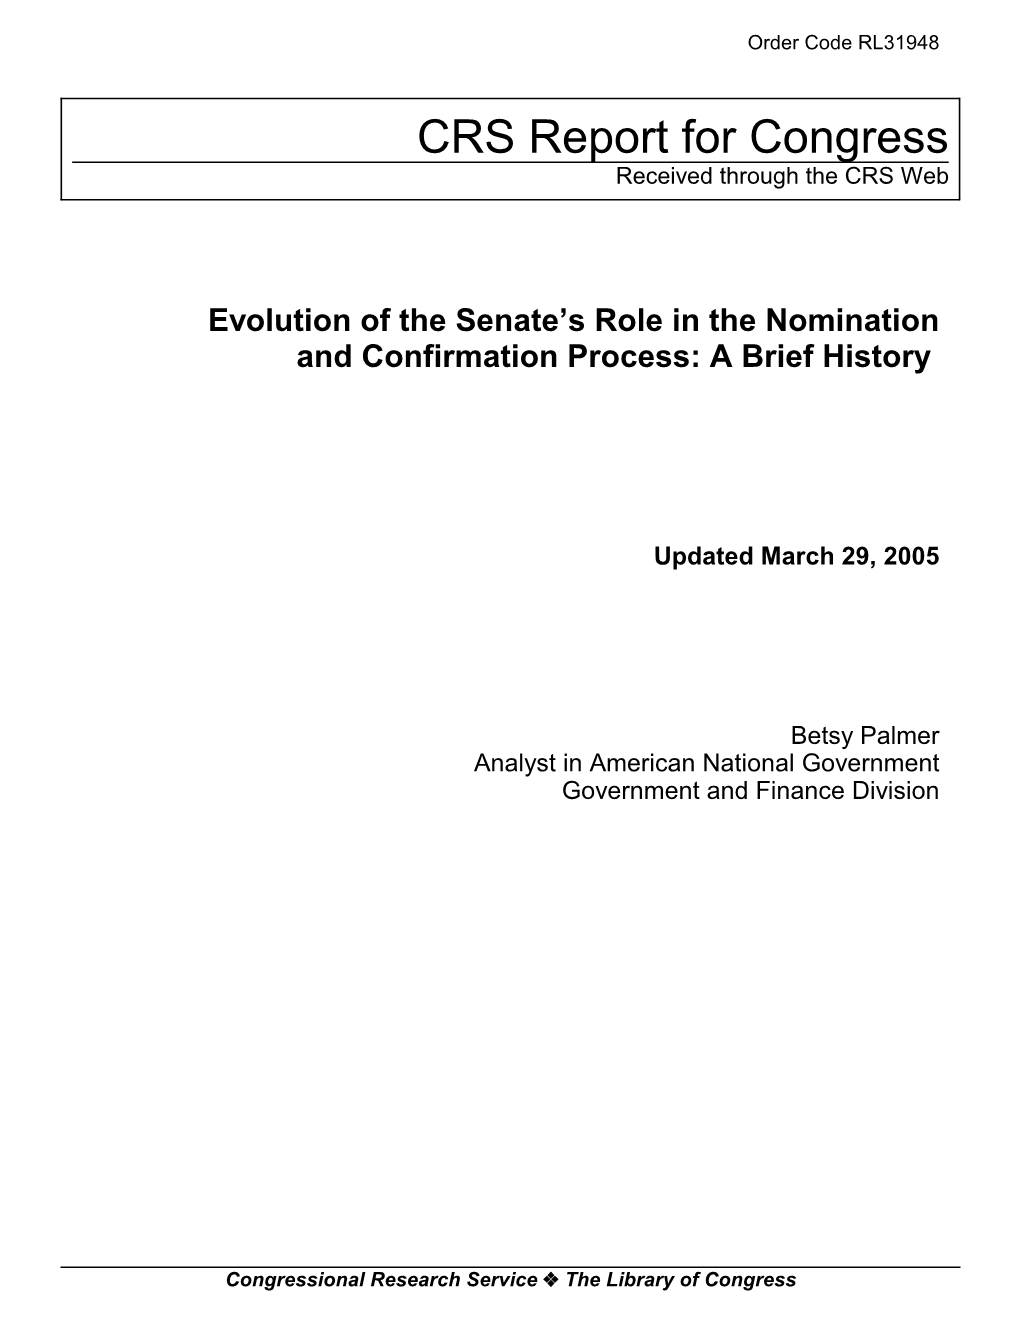 Evolution of the Senate's Role in the Nomination and Confirmation Process